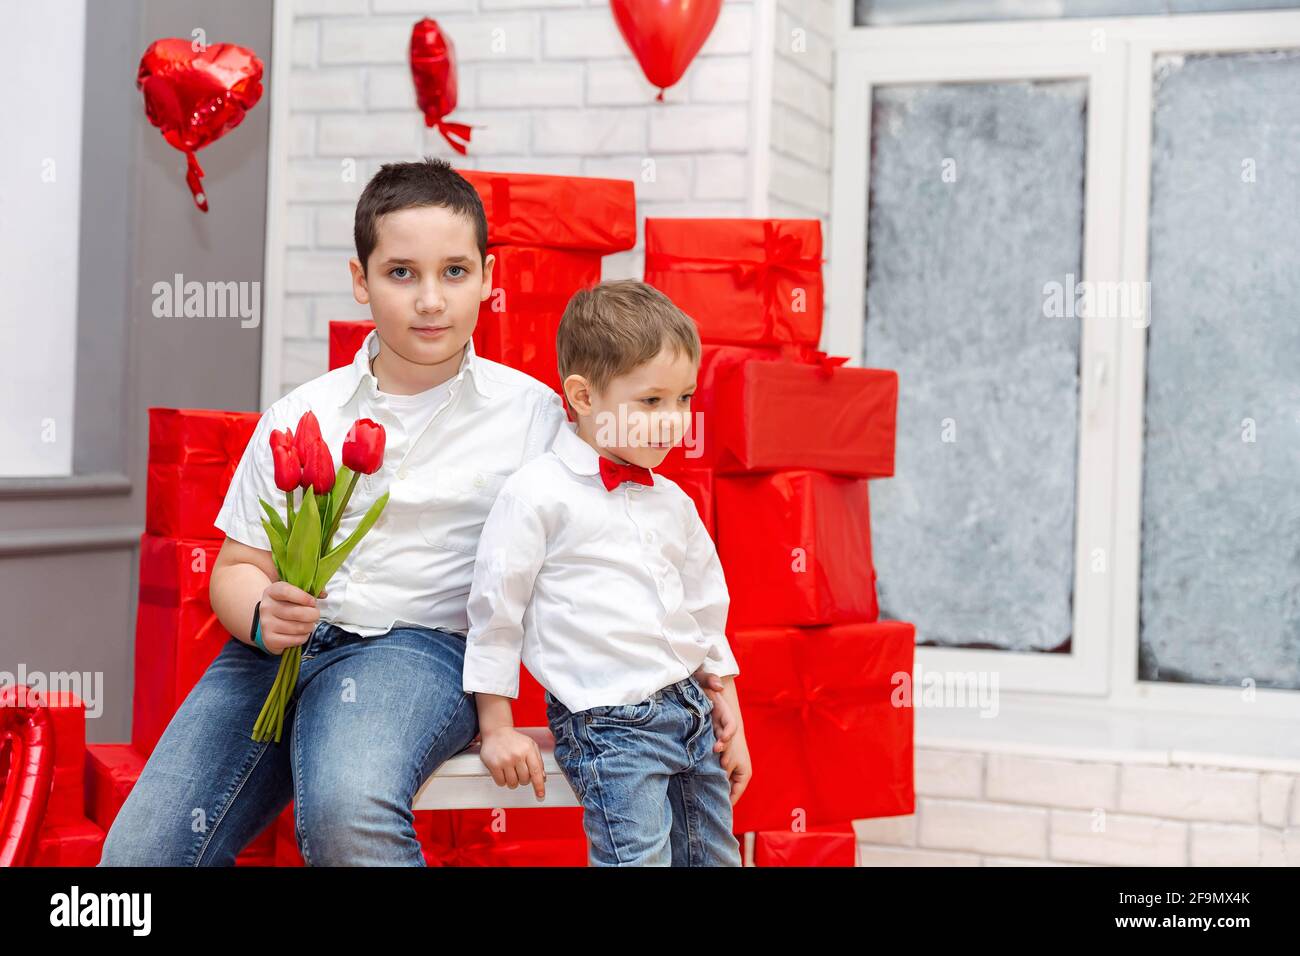 Congratulate mother with mothers day or birthday. Two beautiful kids Stock Photo